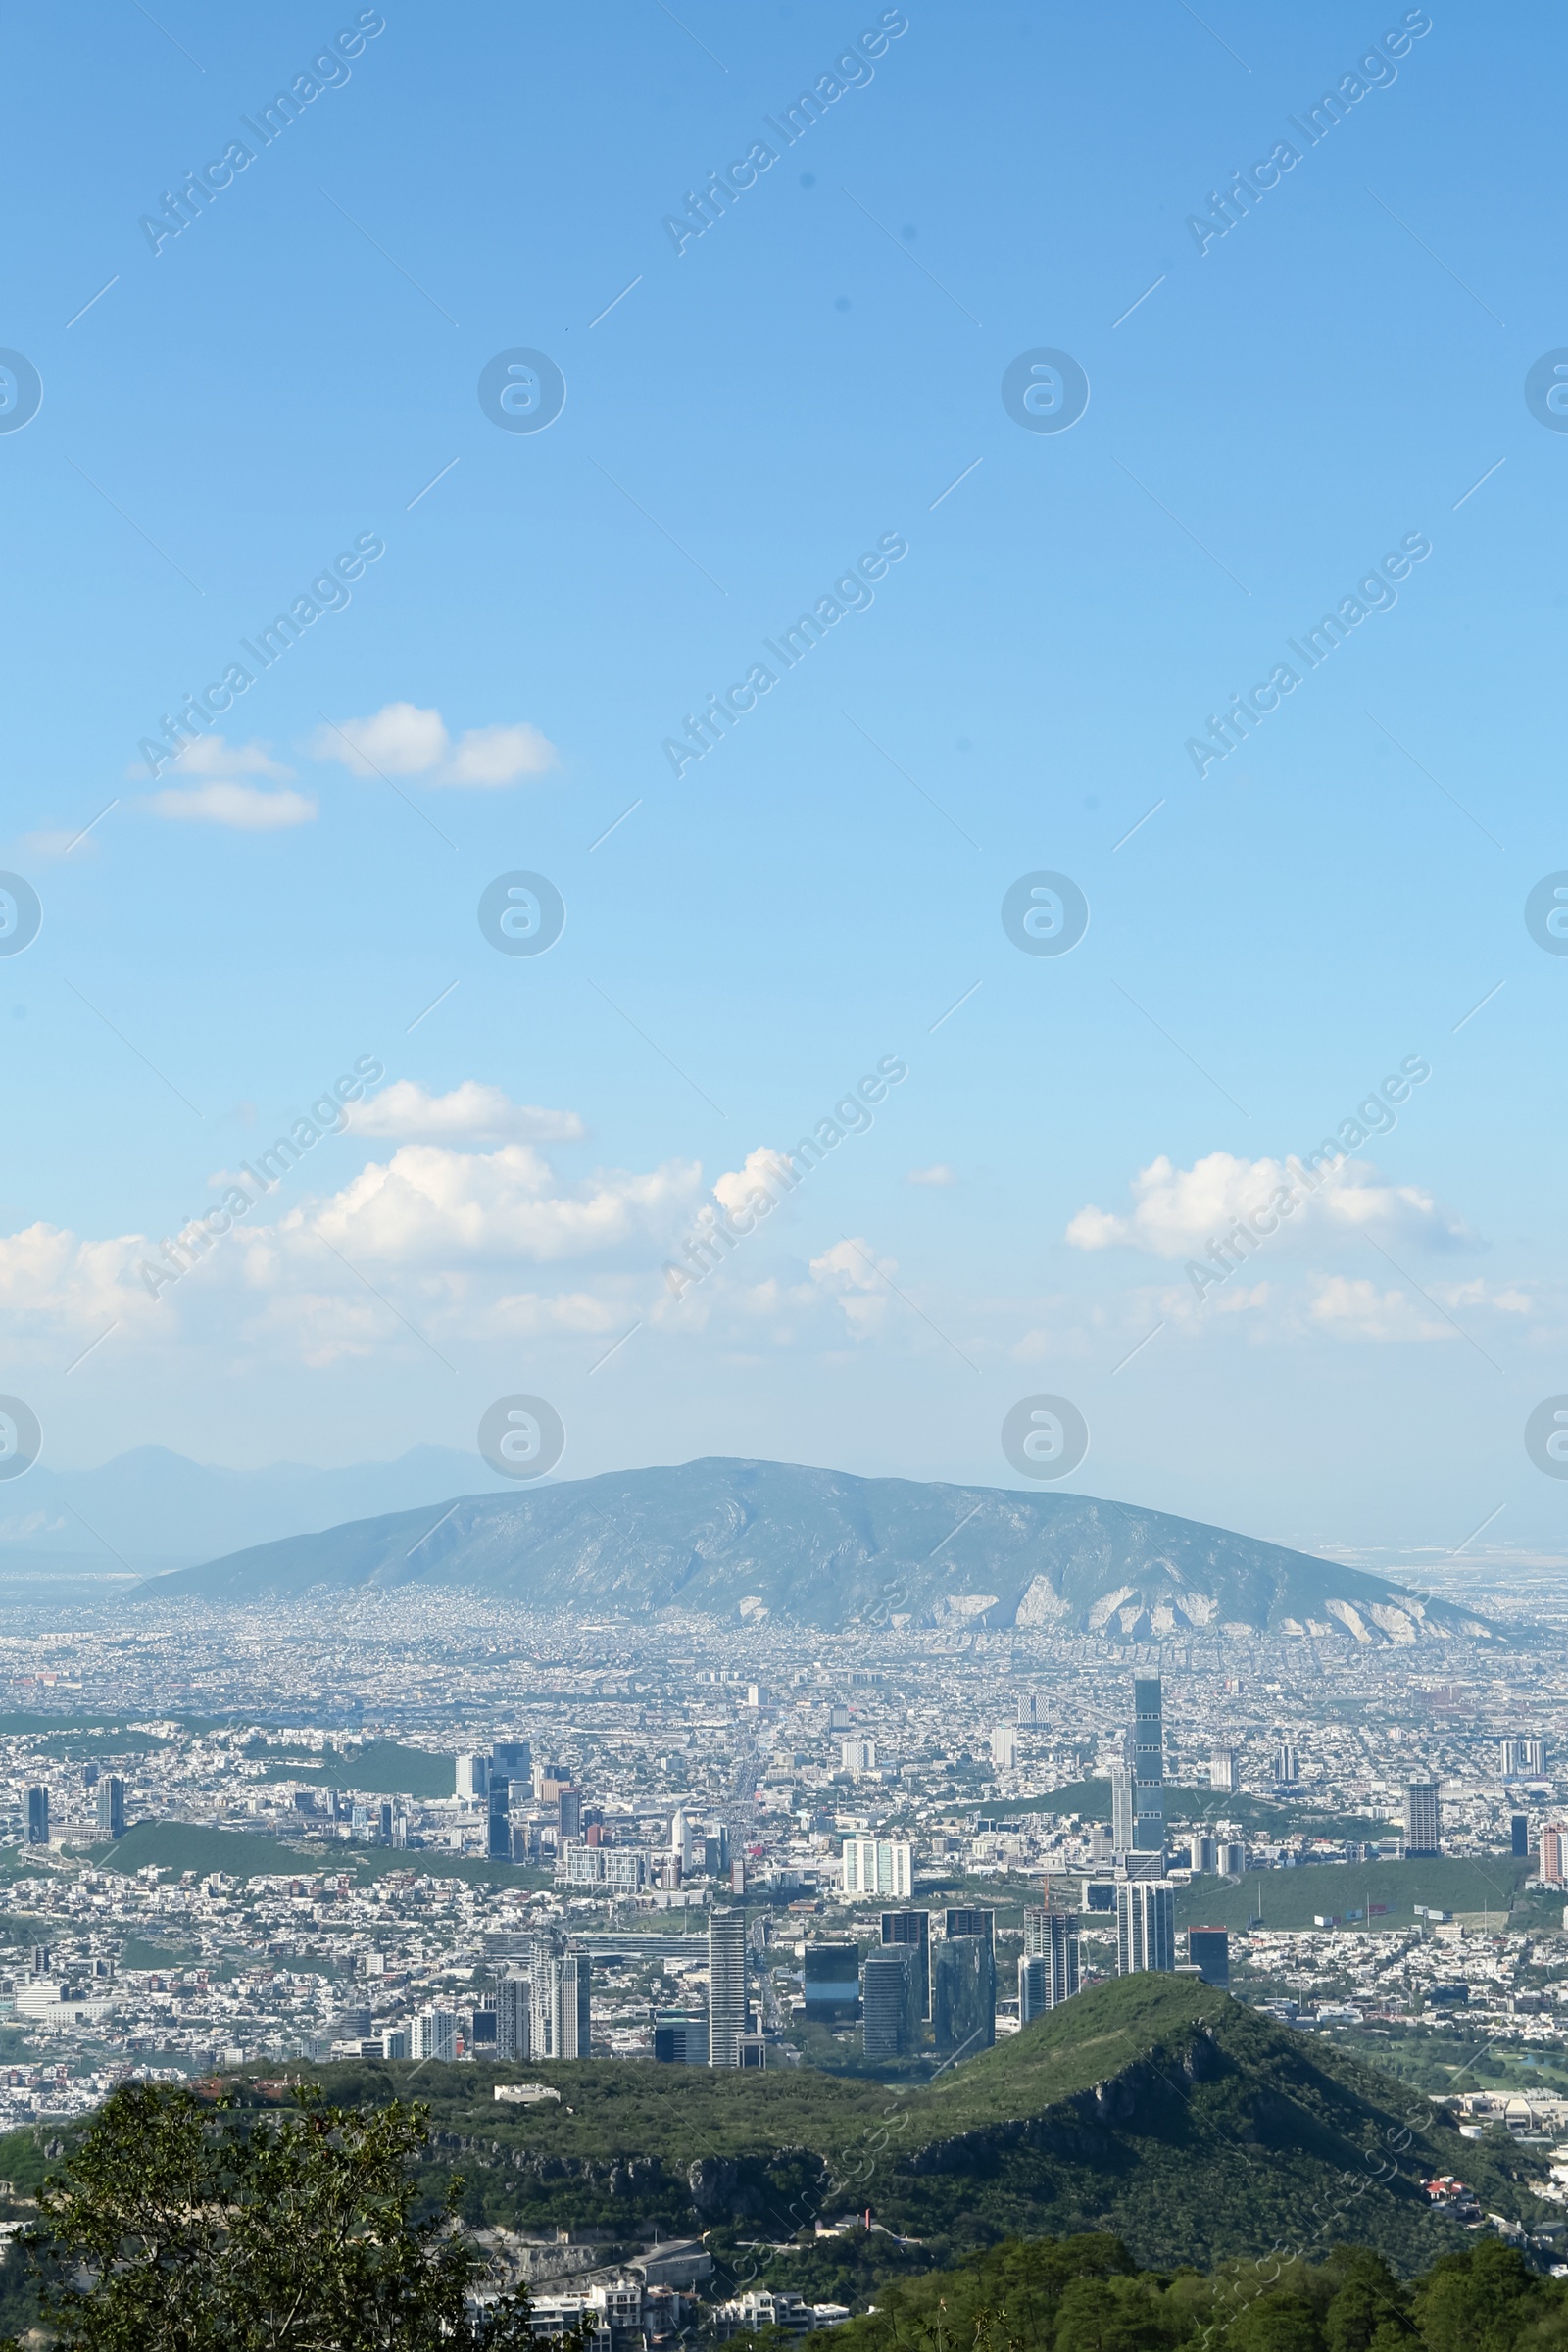 Photo of Picturesque view of city with trees, mountains and buildings under beautiful sky